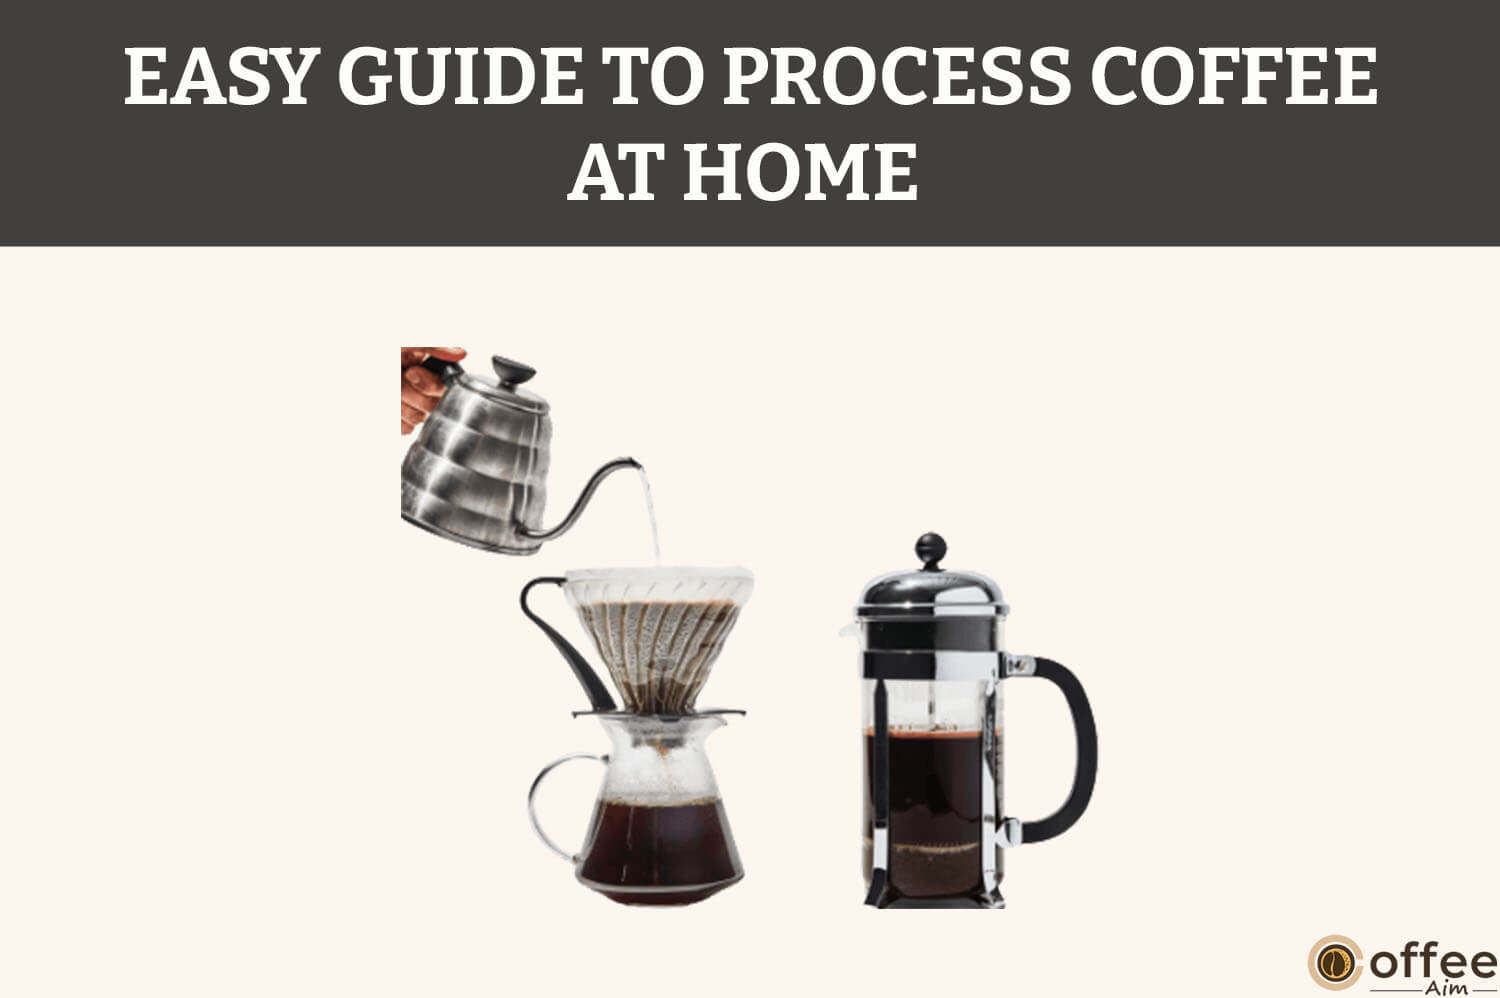 Featured image for the article "Easy Guide to Process Coffee at Home"